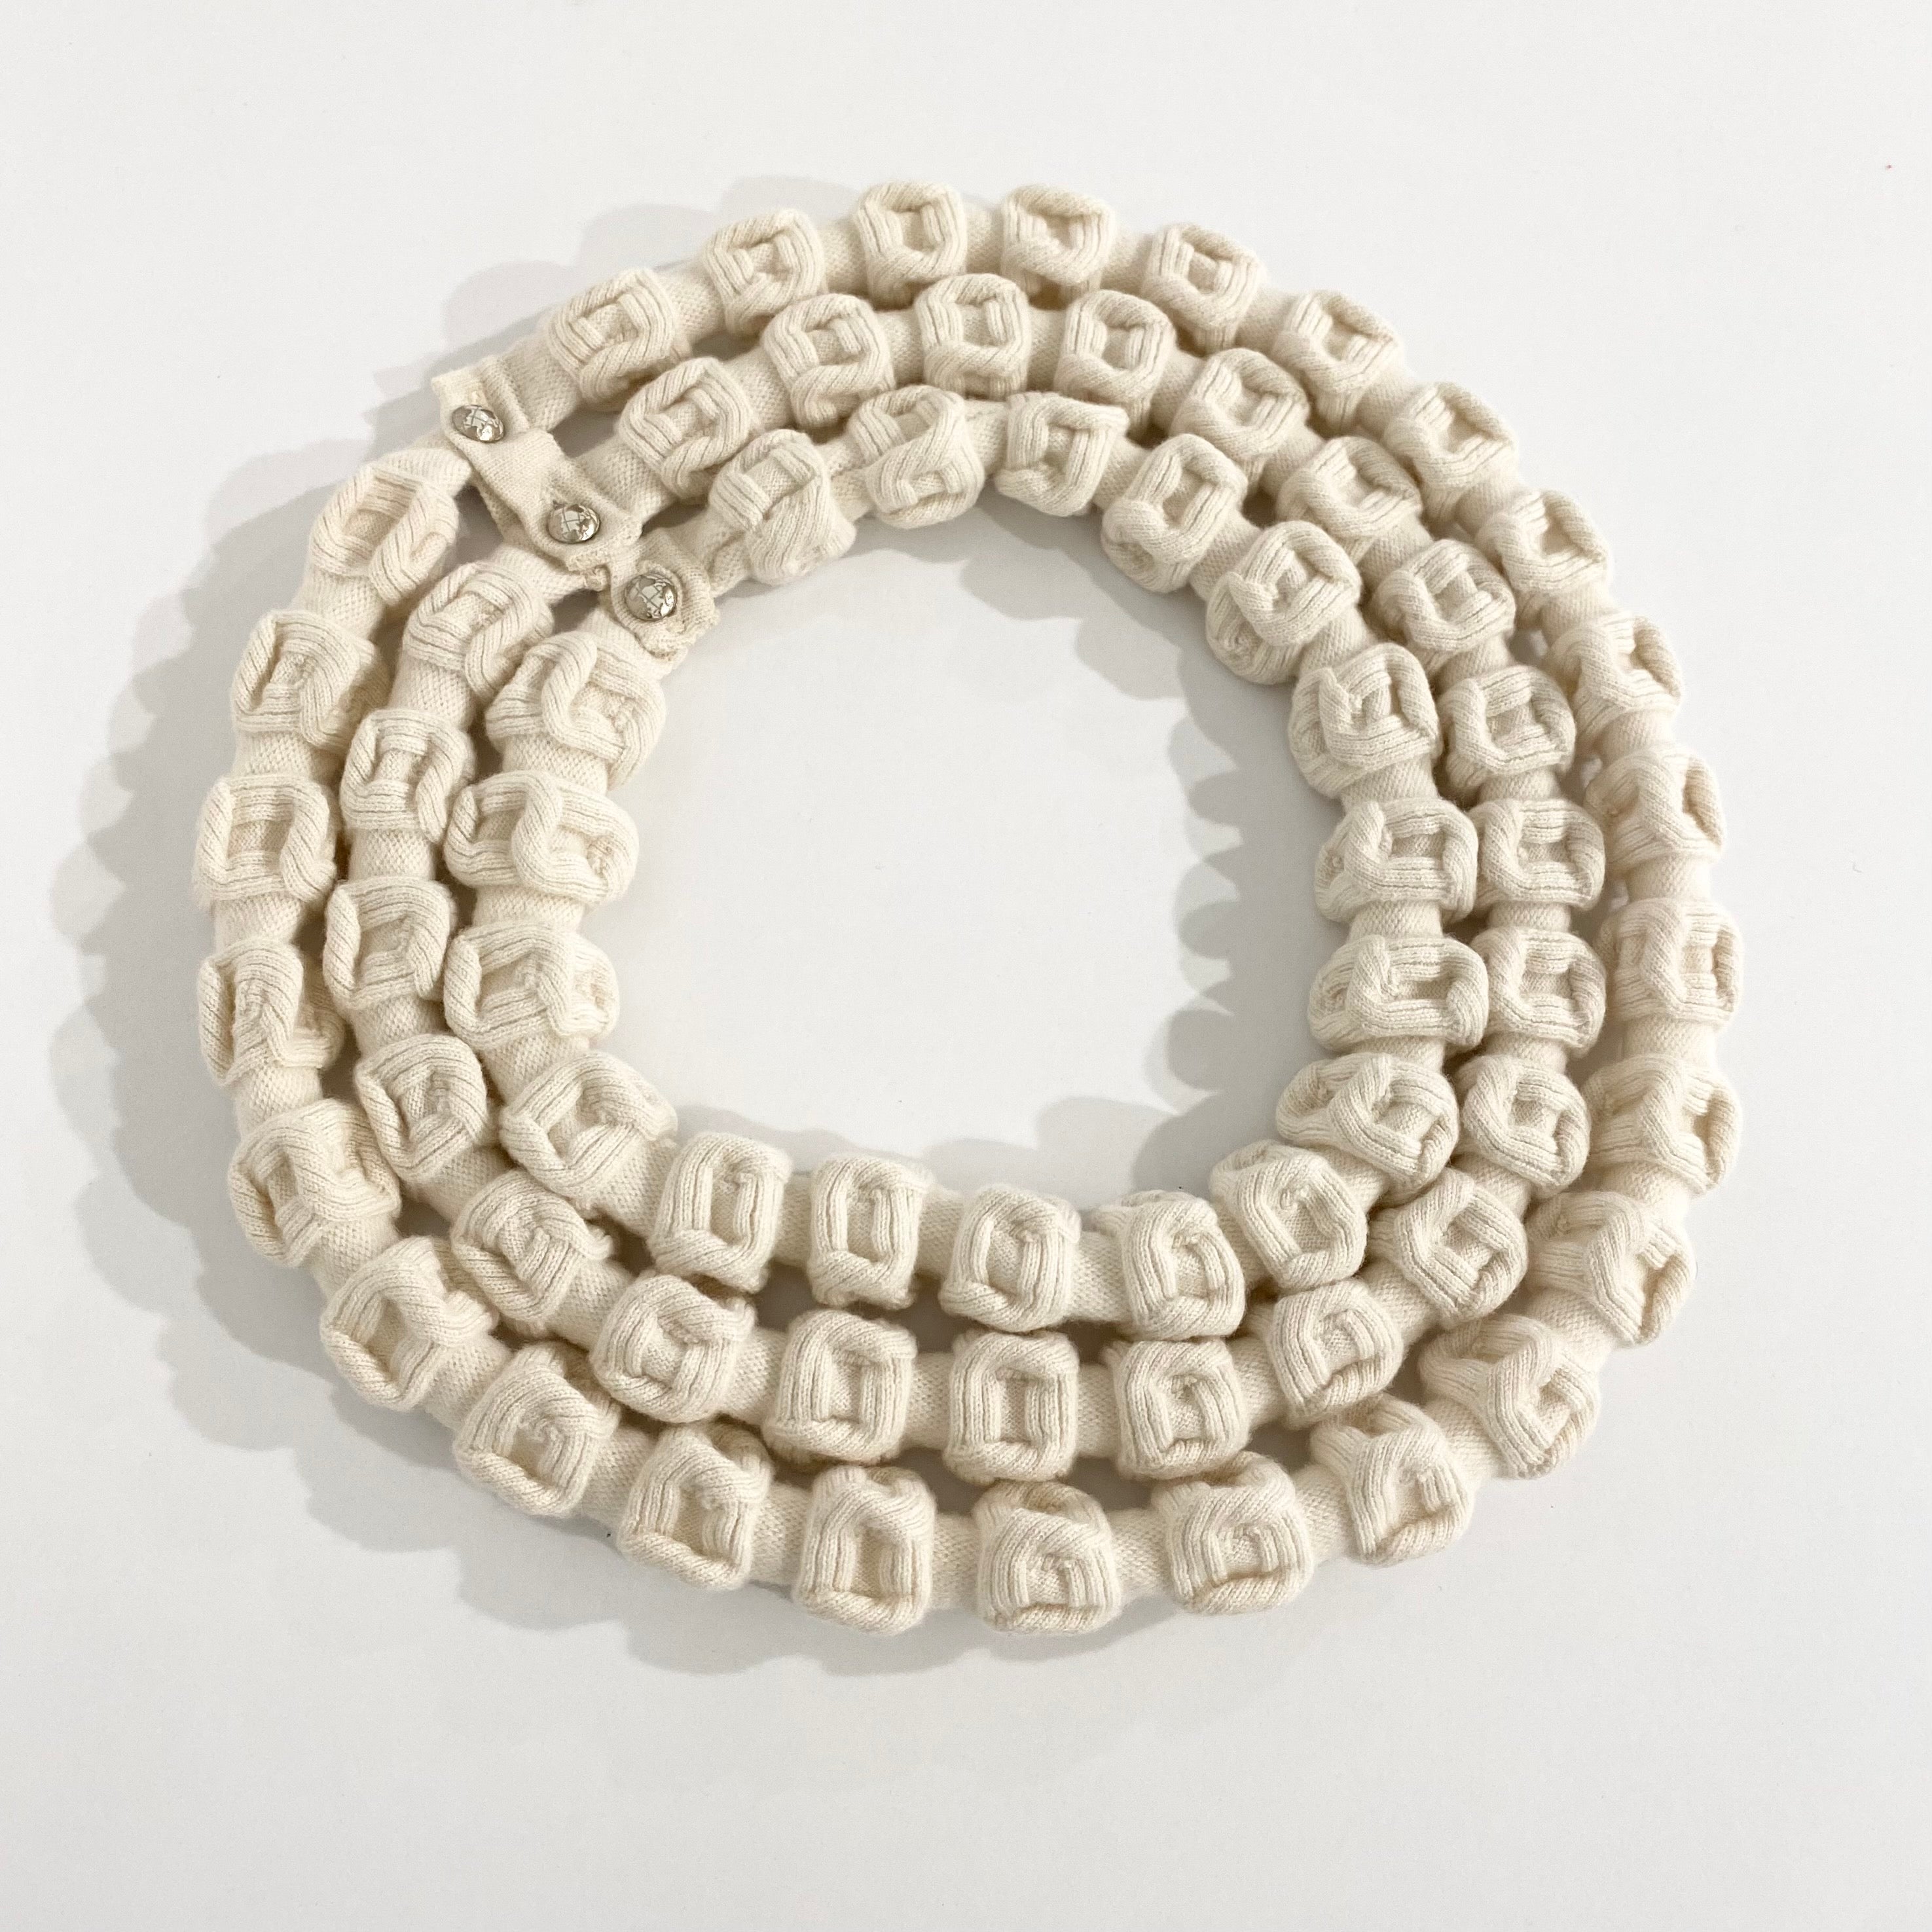 Chanel Cream Chunky Knit Necklace